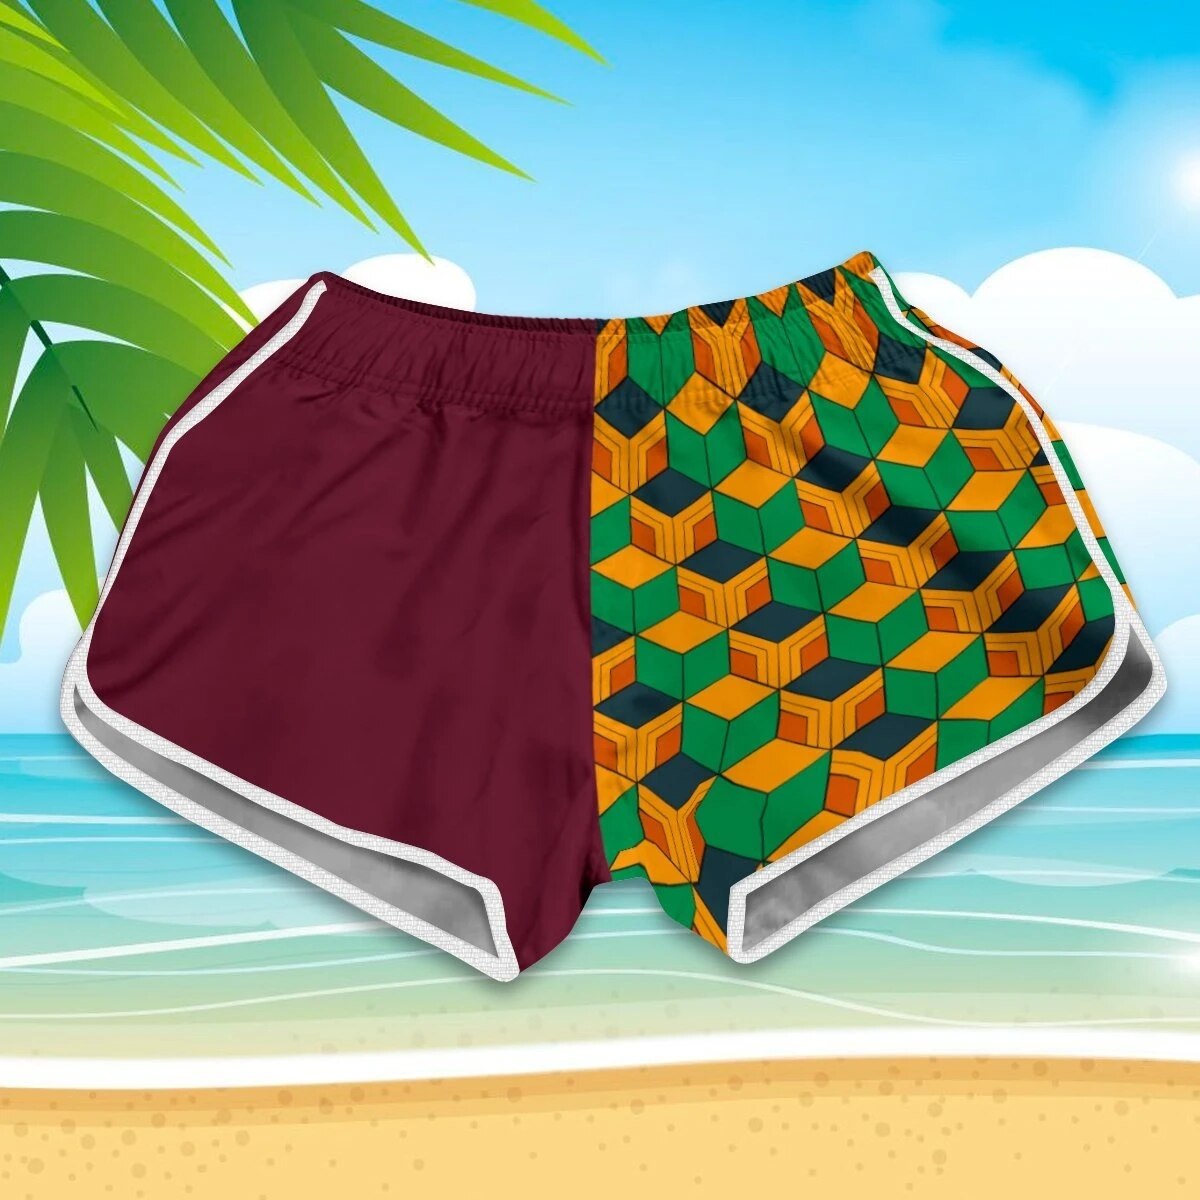 Demon Slayer – Different Characters Themed Comfortable Summer/Beach Shorts (4 Designs) Pants & Shorts